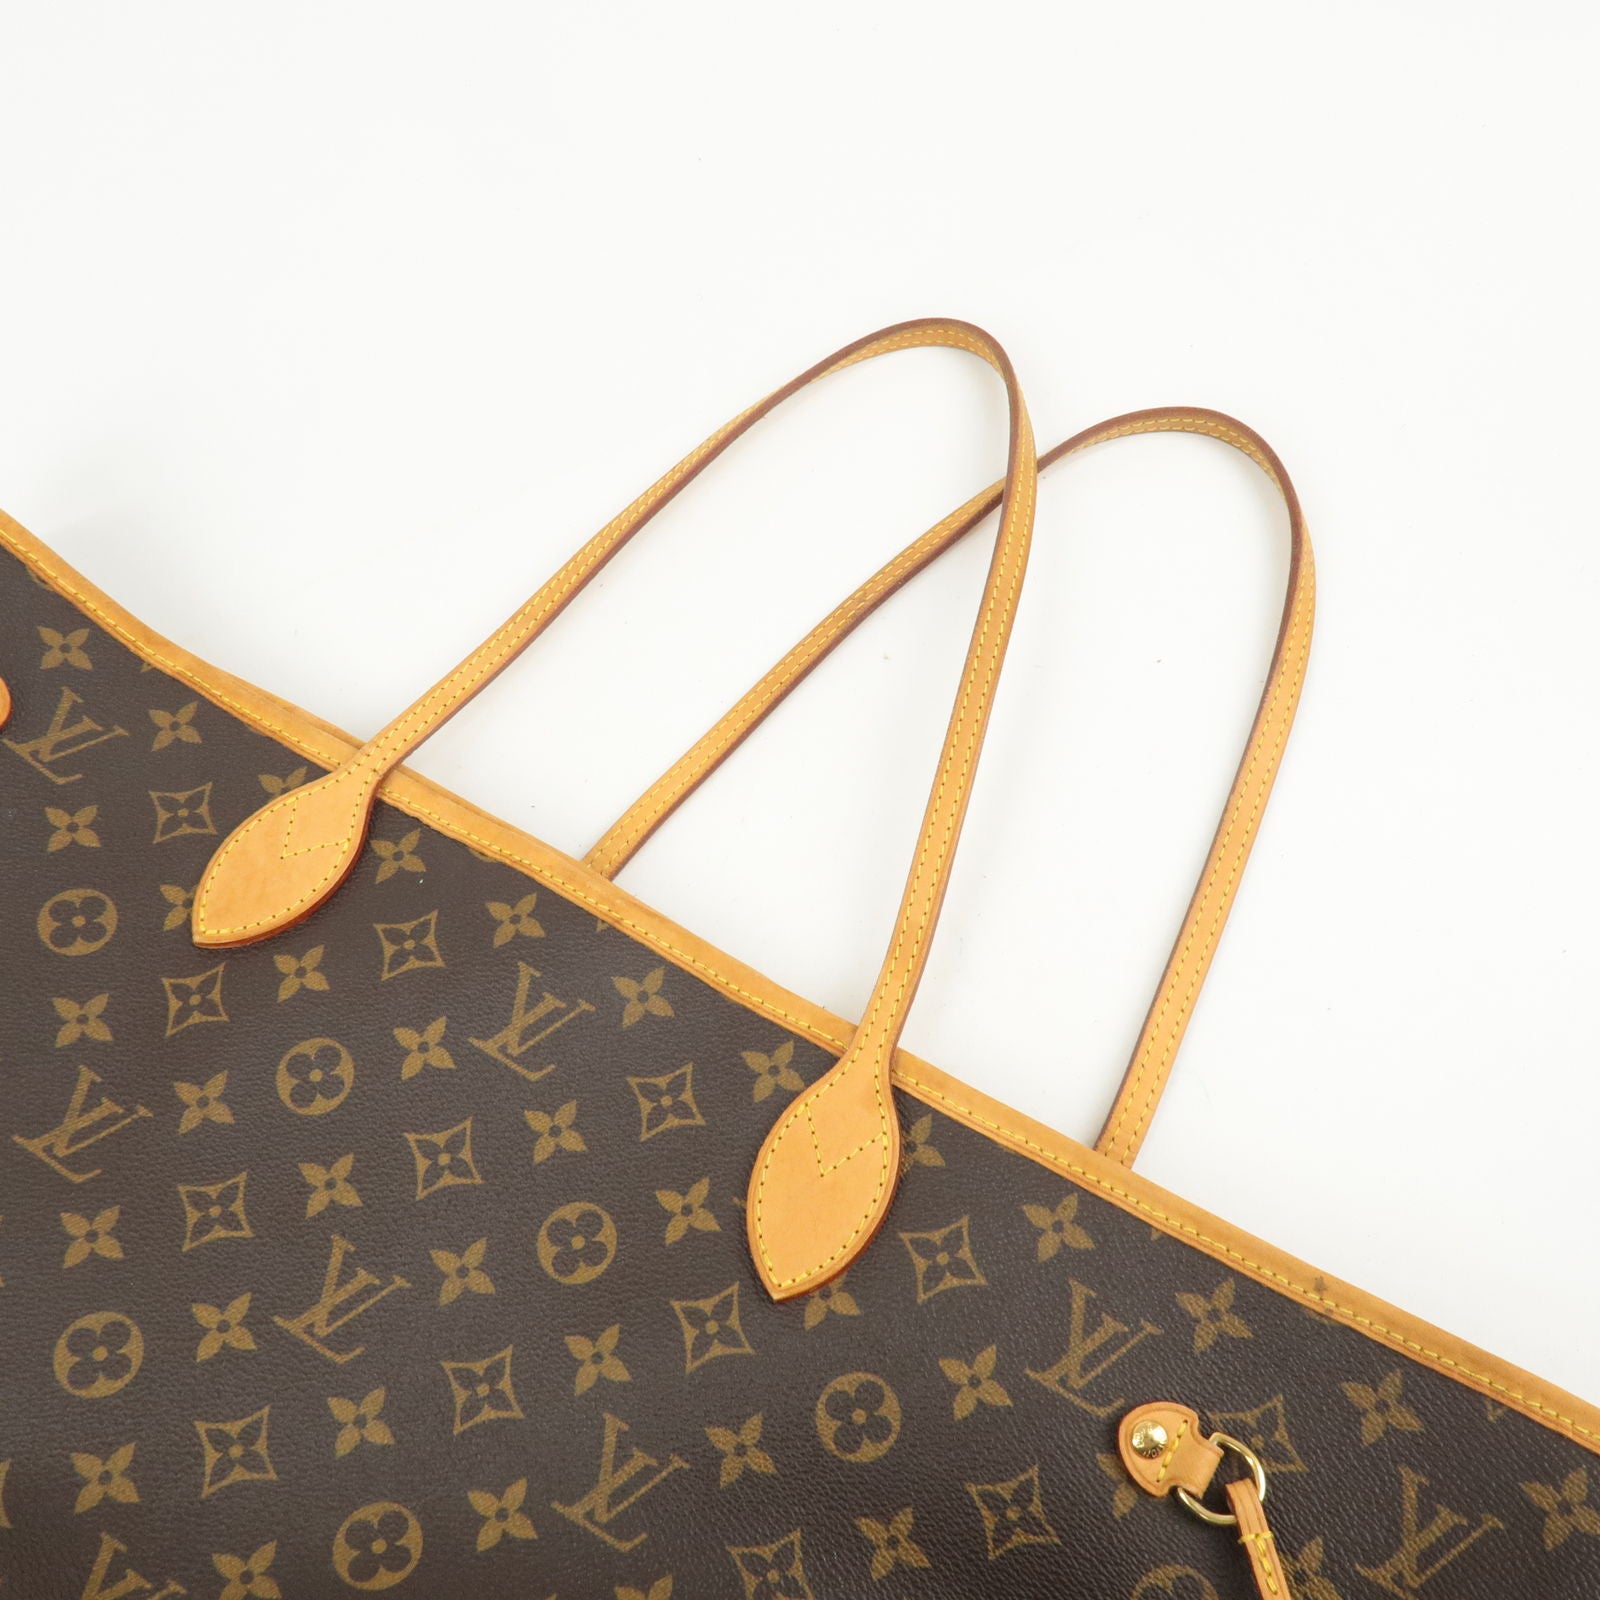 Authenticated Used Louis Vuitton Monogram Neverfull GM M40157 Tote Bag 0076  LOUIS VUITTON 